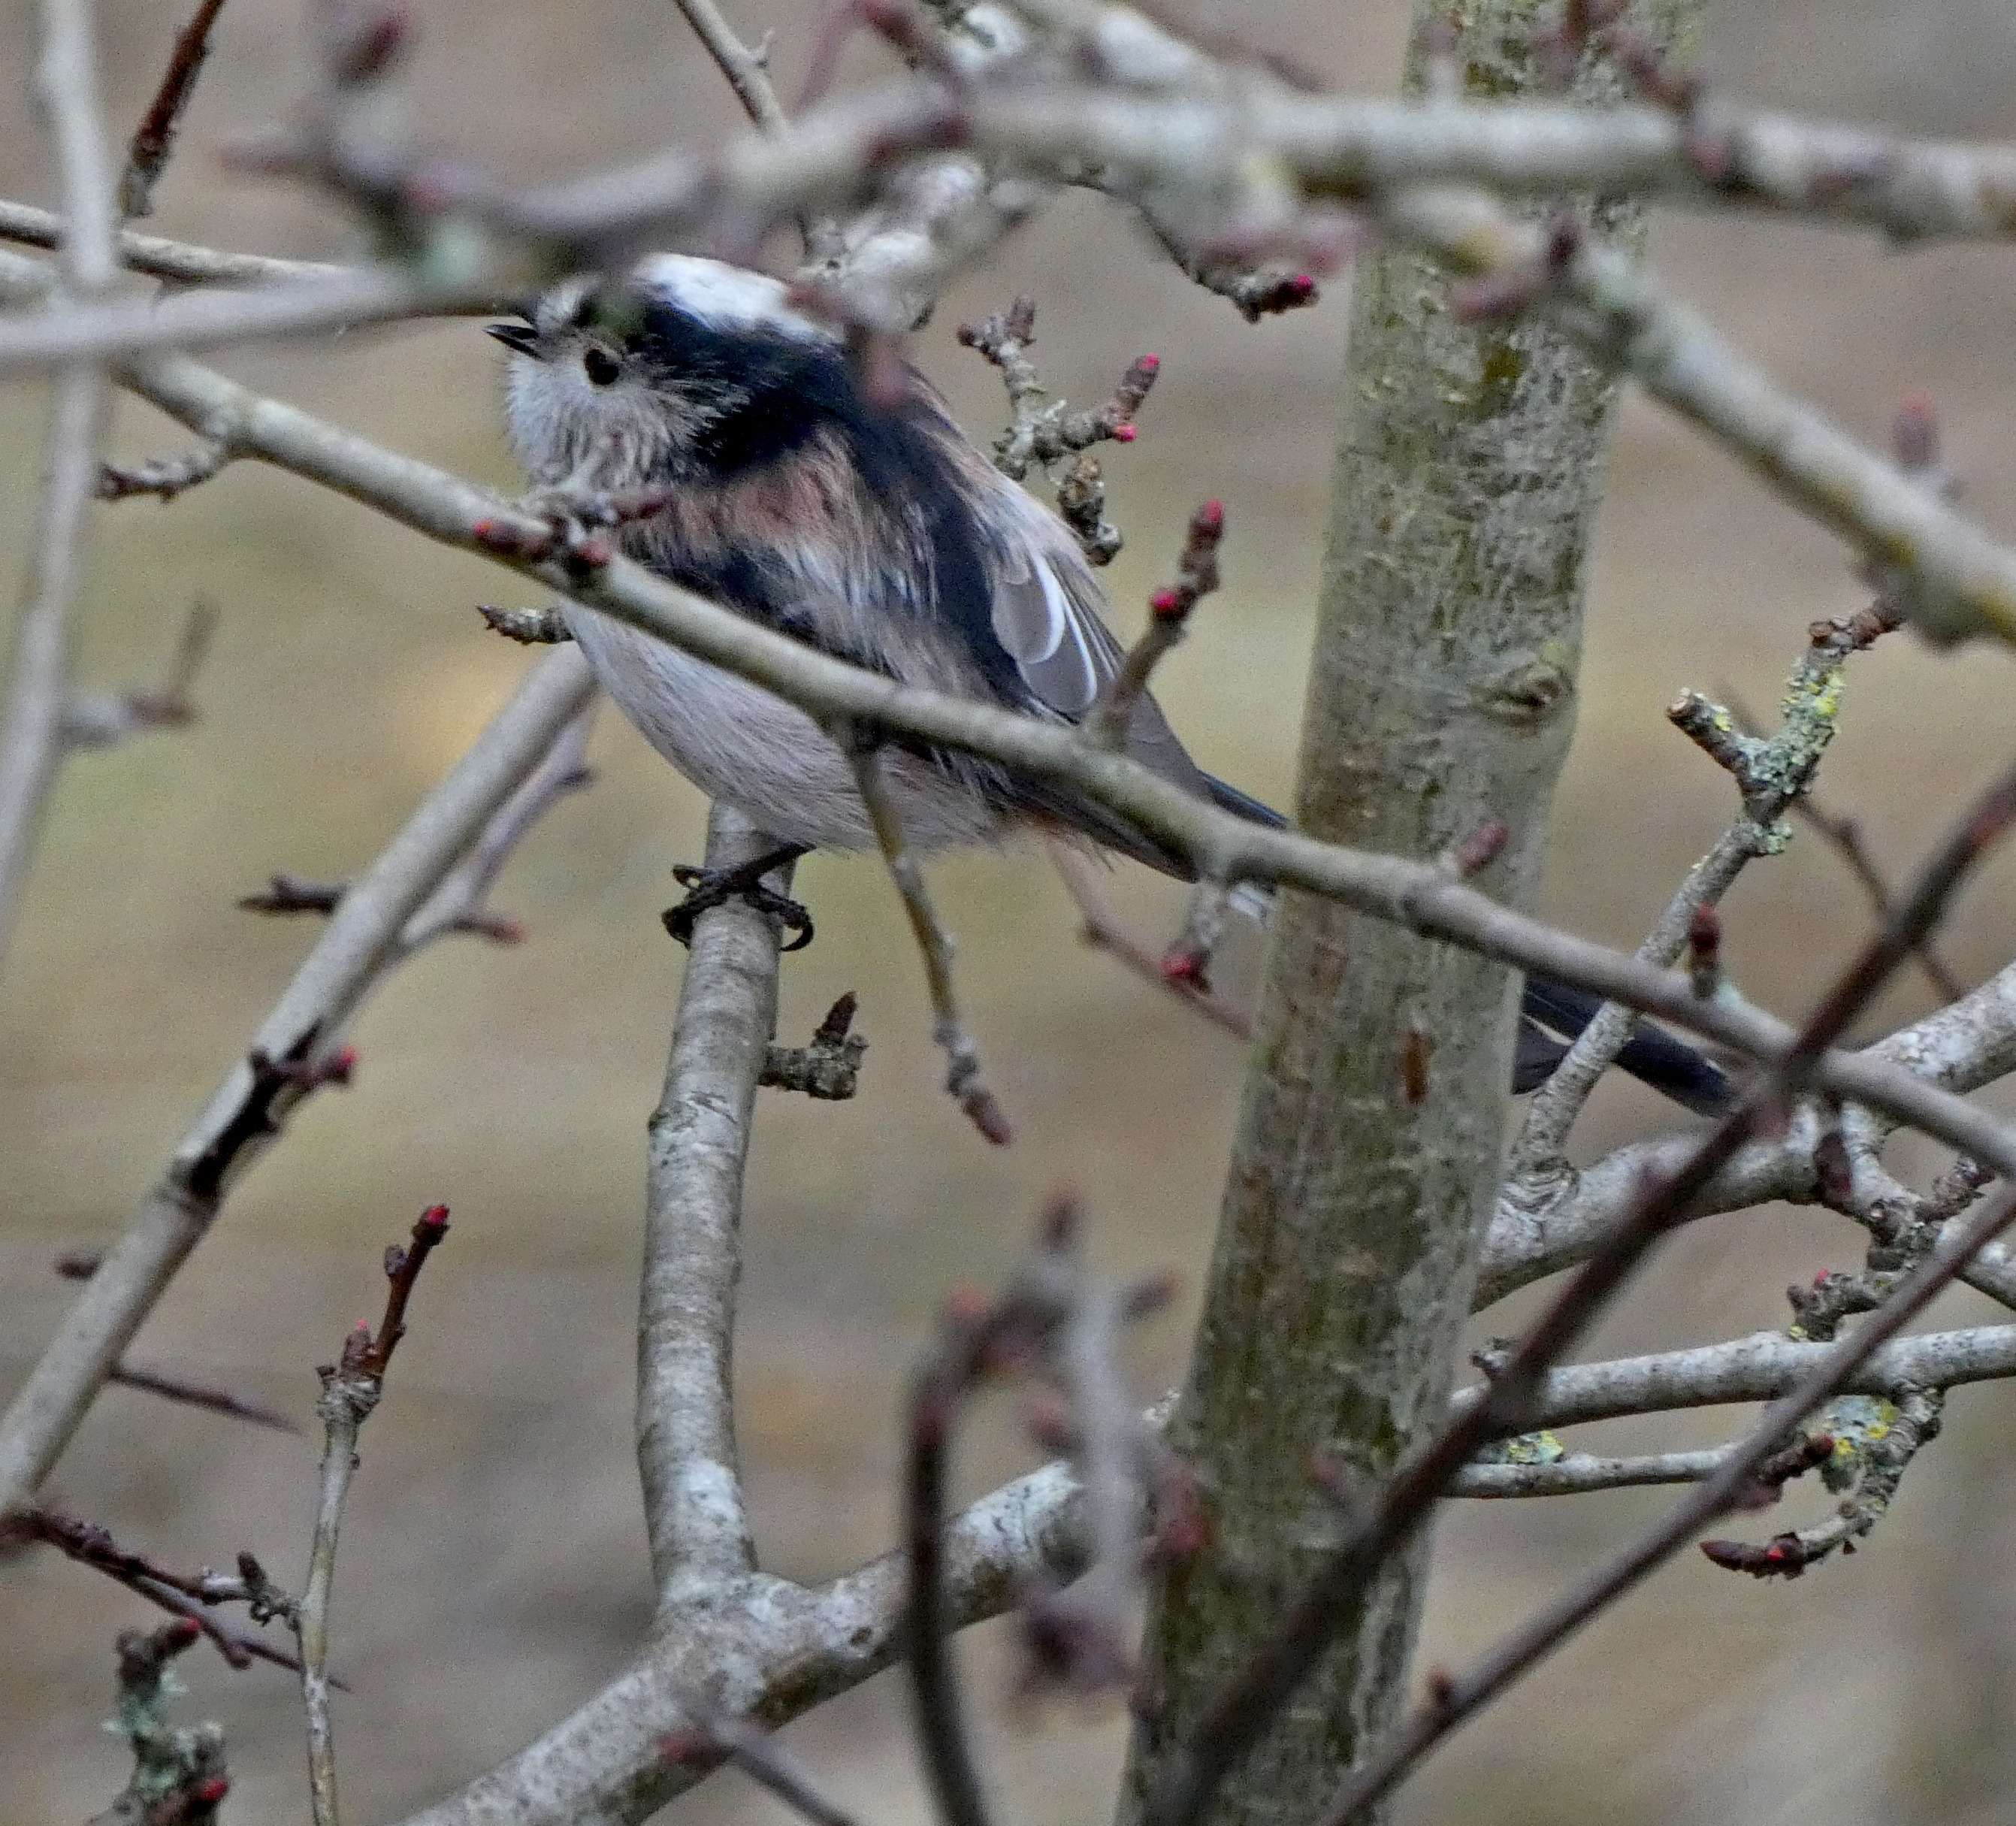 Long-Tailed Tit, Saltaire Canal and River, 7th February 2023